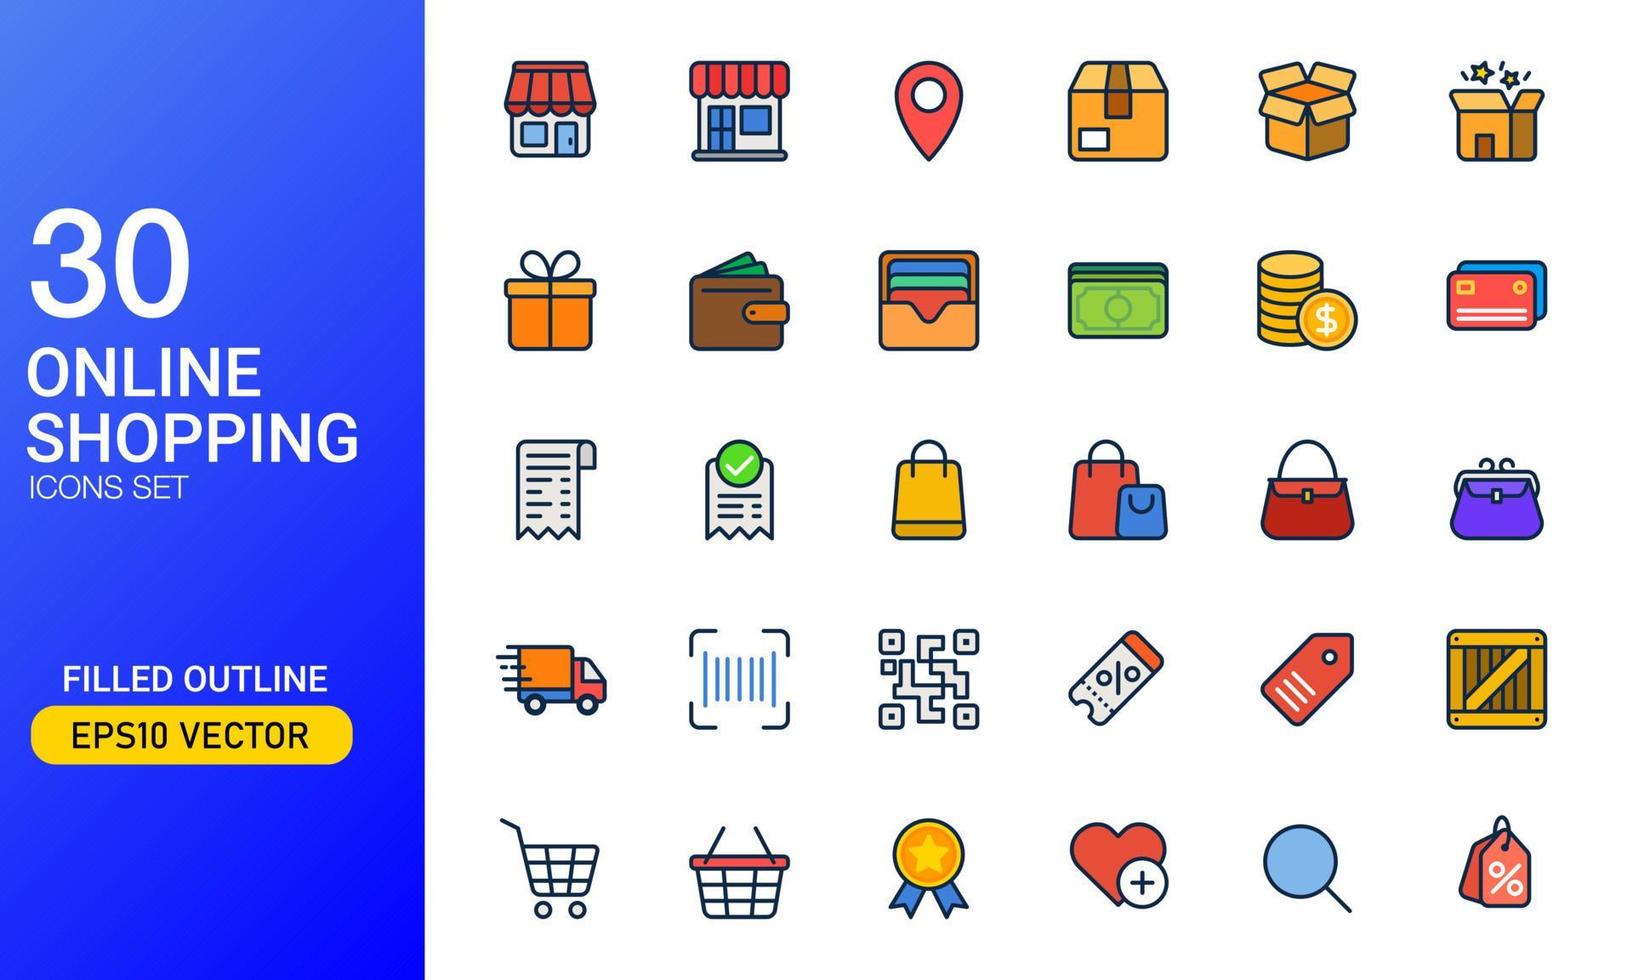 Commerce and shopping icon set in filled outline style. Suitable for design element of online shopping app, digital marketplace, and open shop user interface. vector